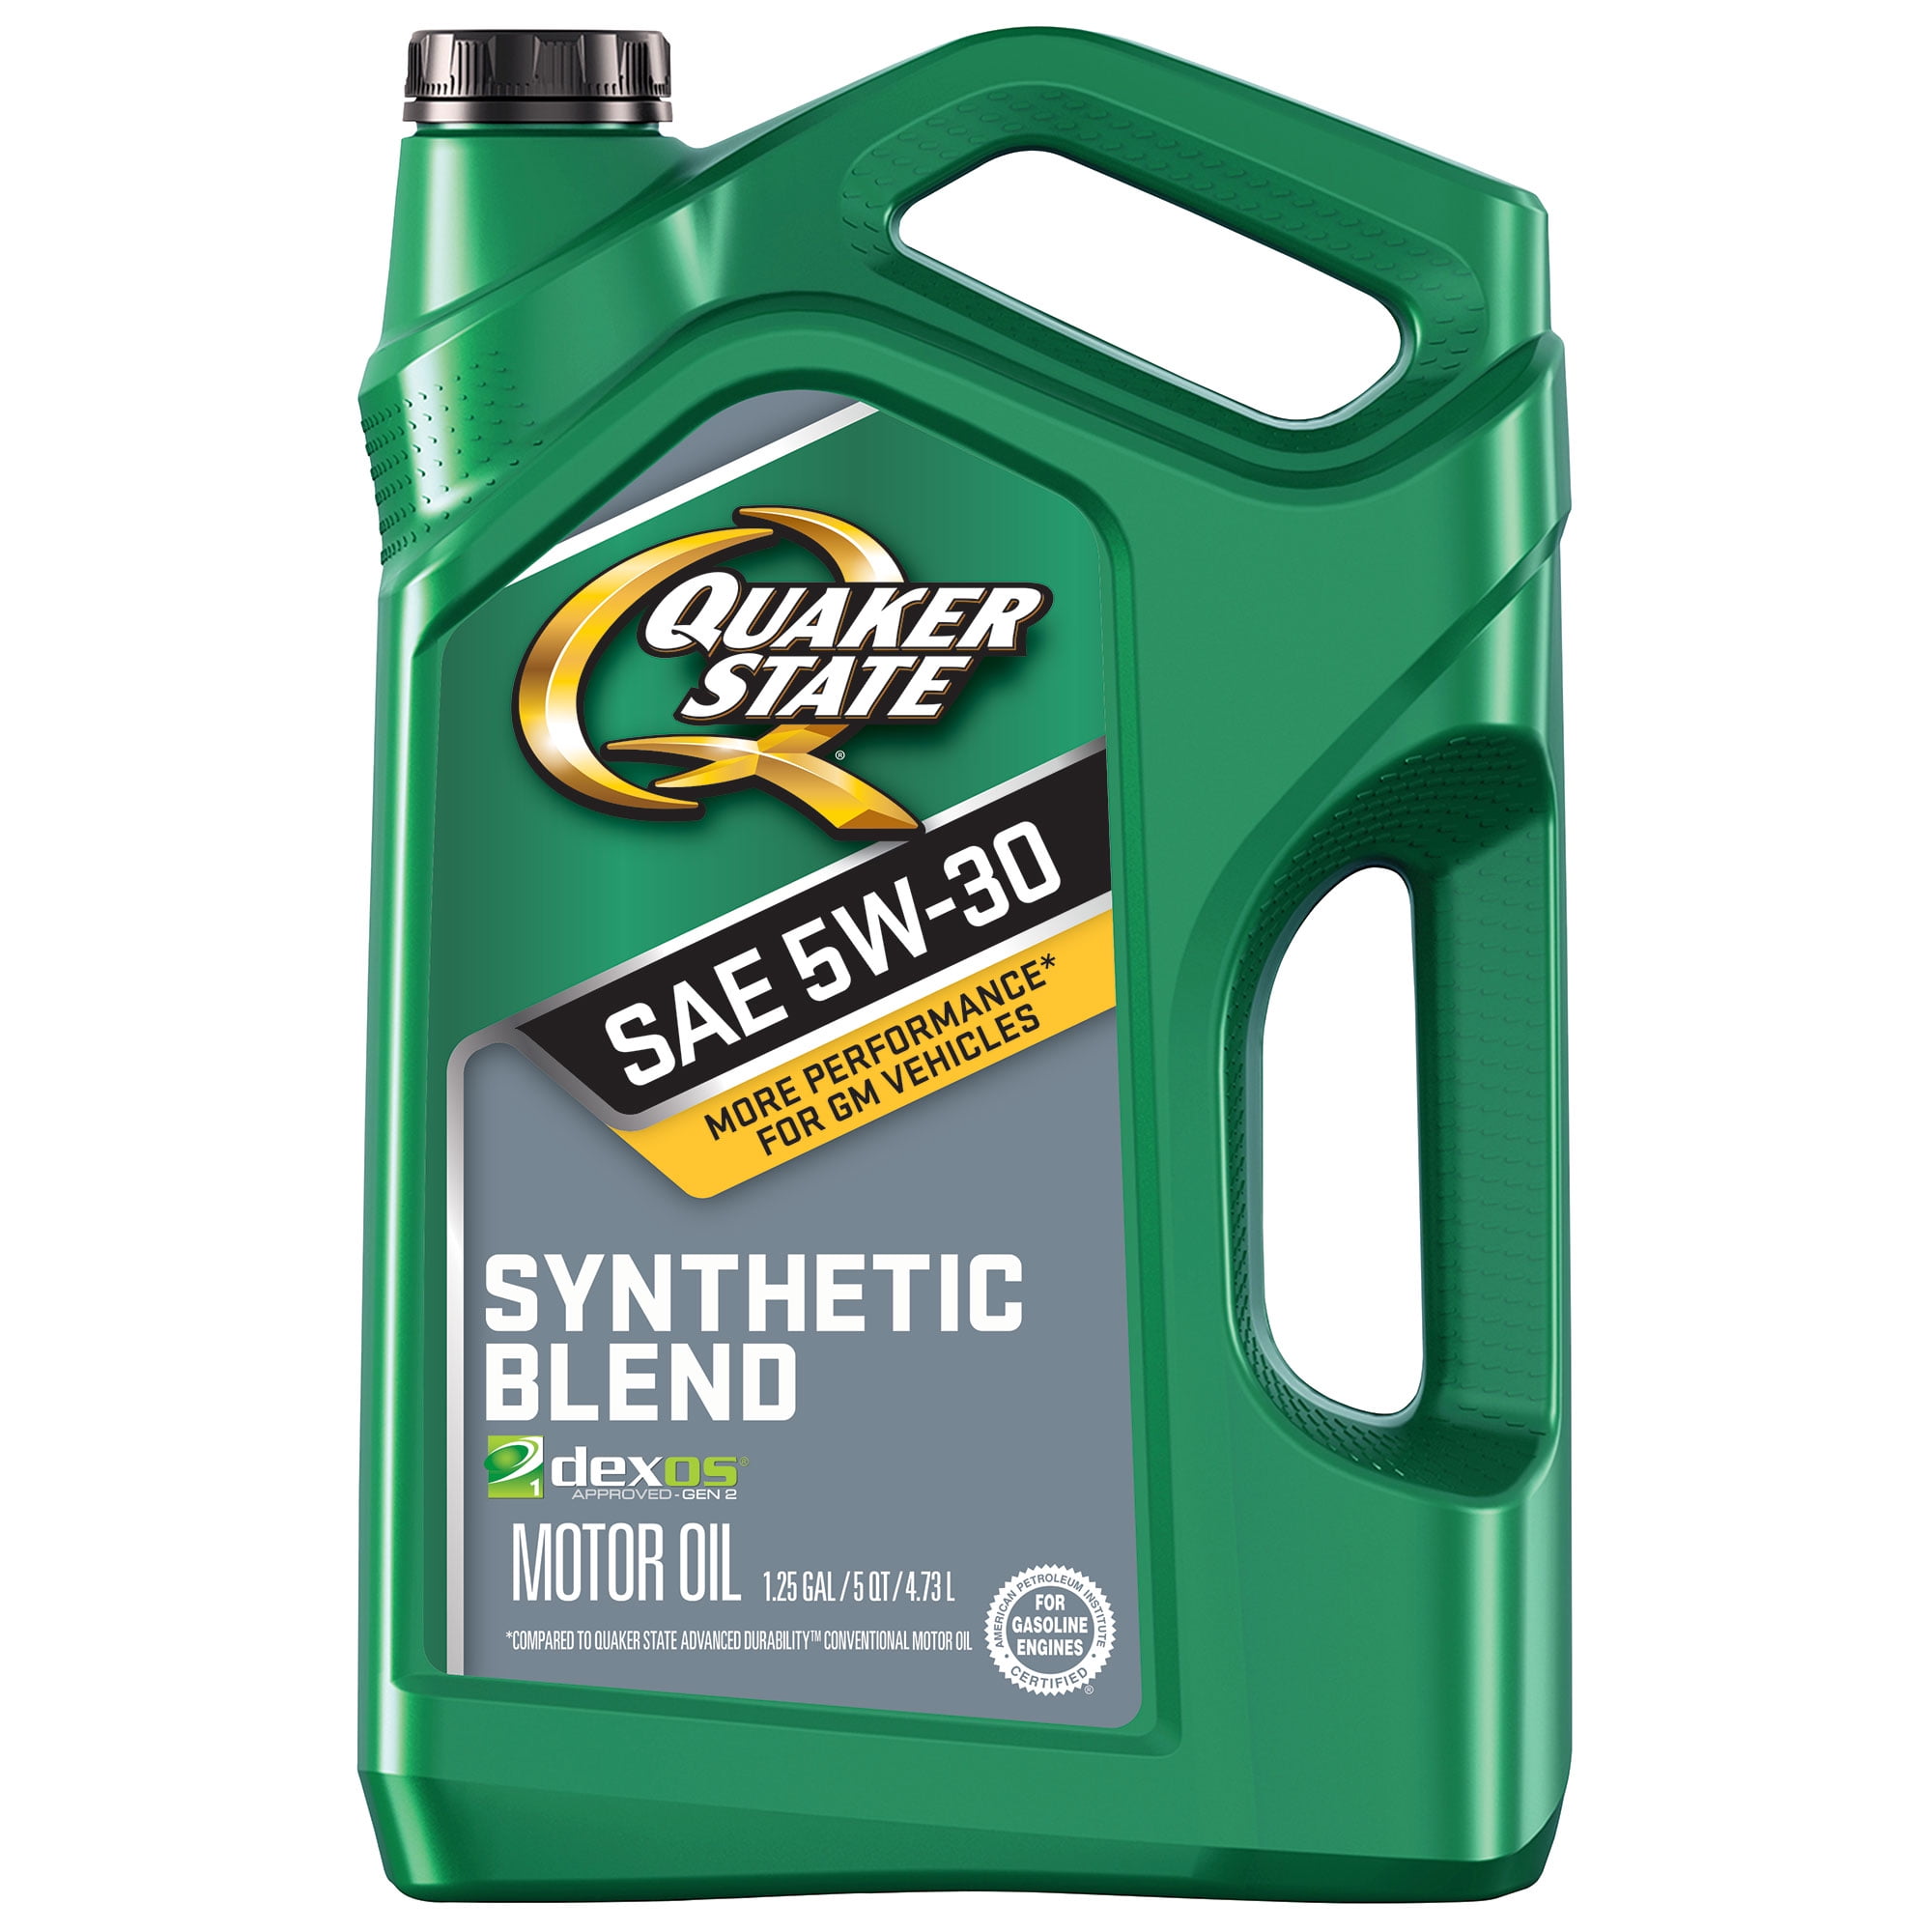 What Is Quaker State Oil